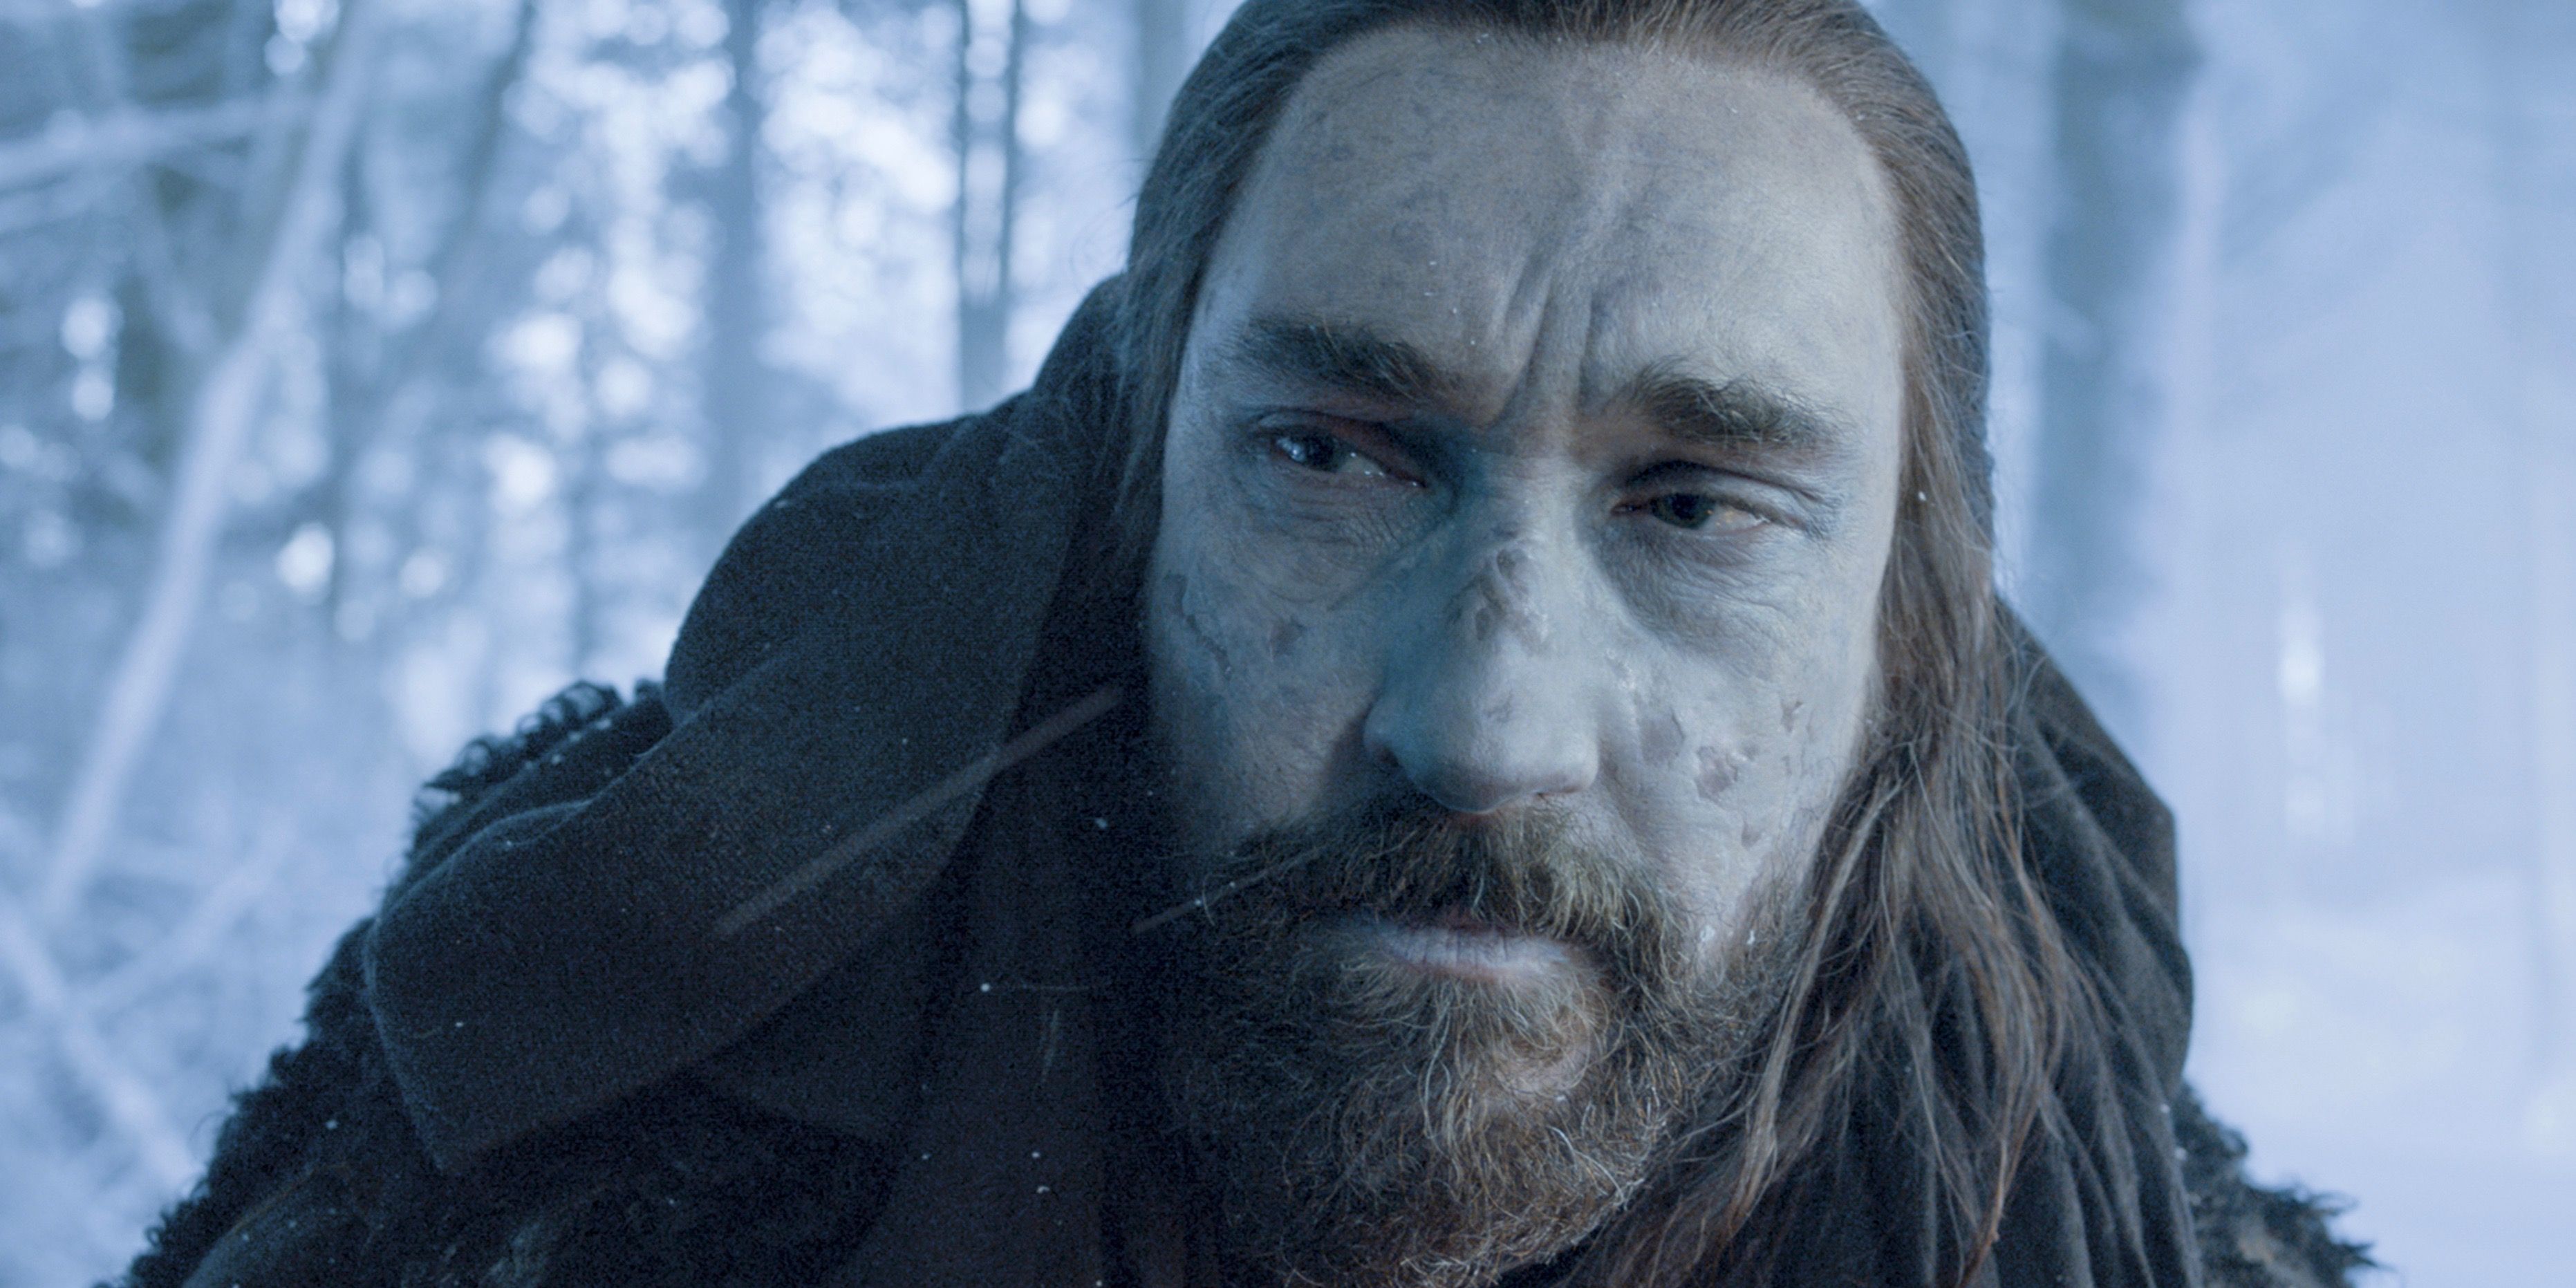 Benjen Stark standing in a snowy forest in Game of Thrones